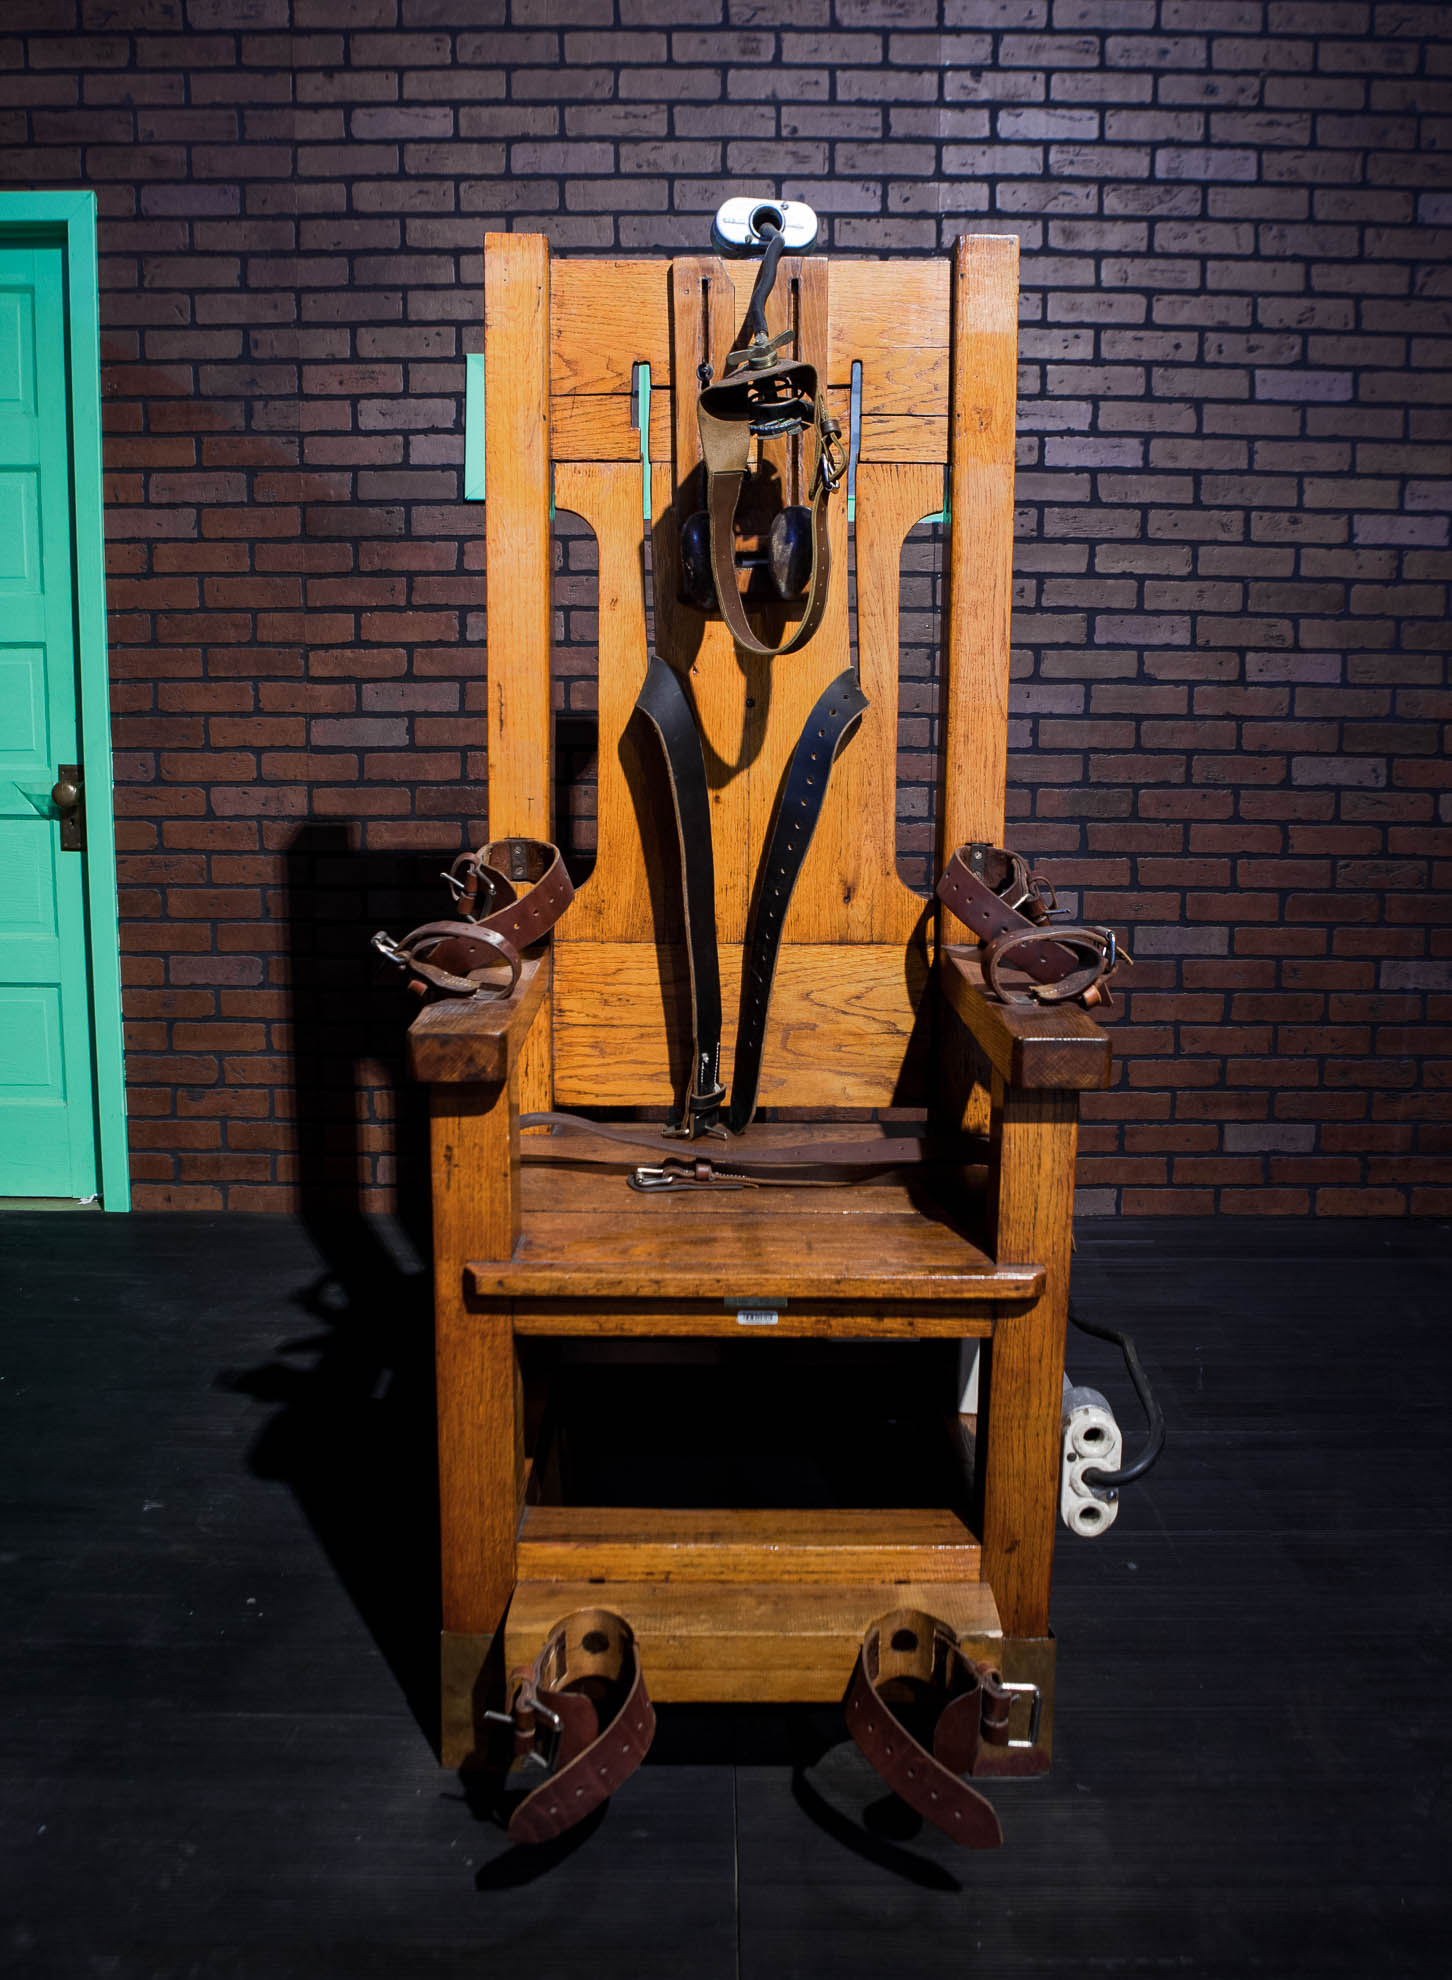 death penalty, photography, photos, execution, prison, documentary, texas, electric chair, old sparky